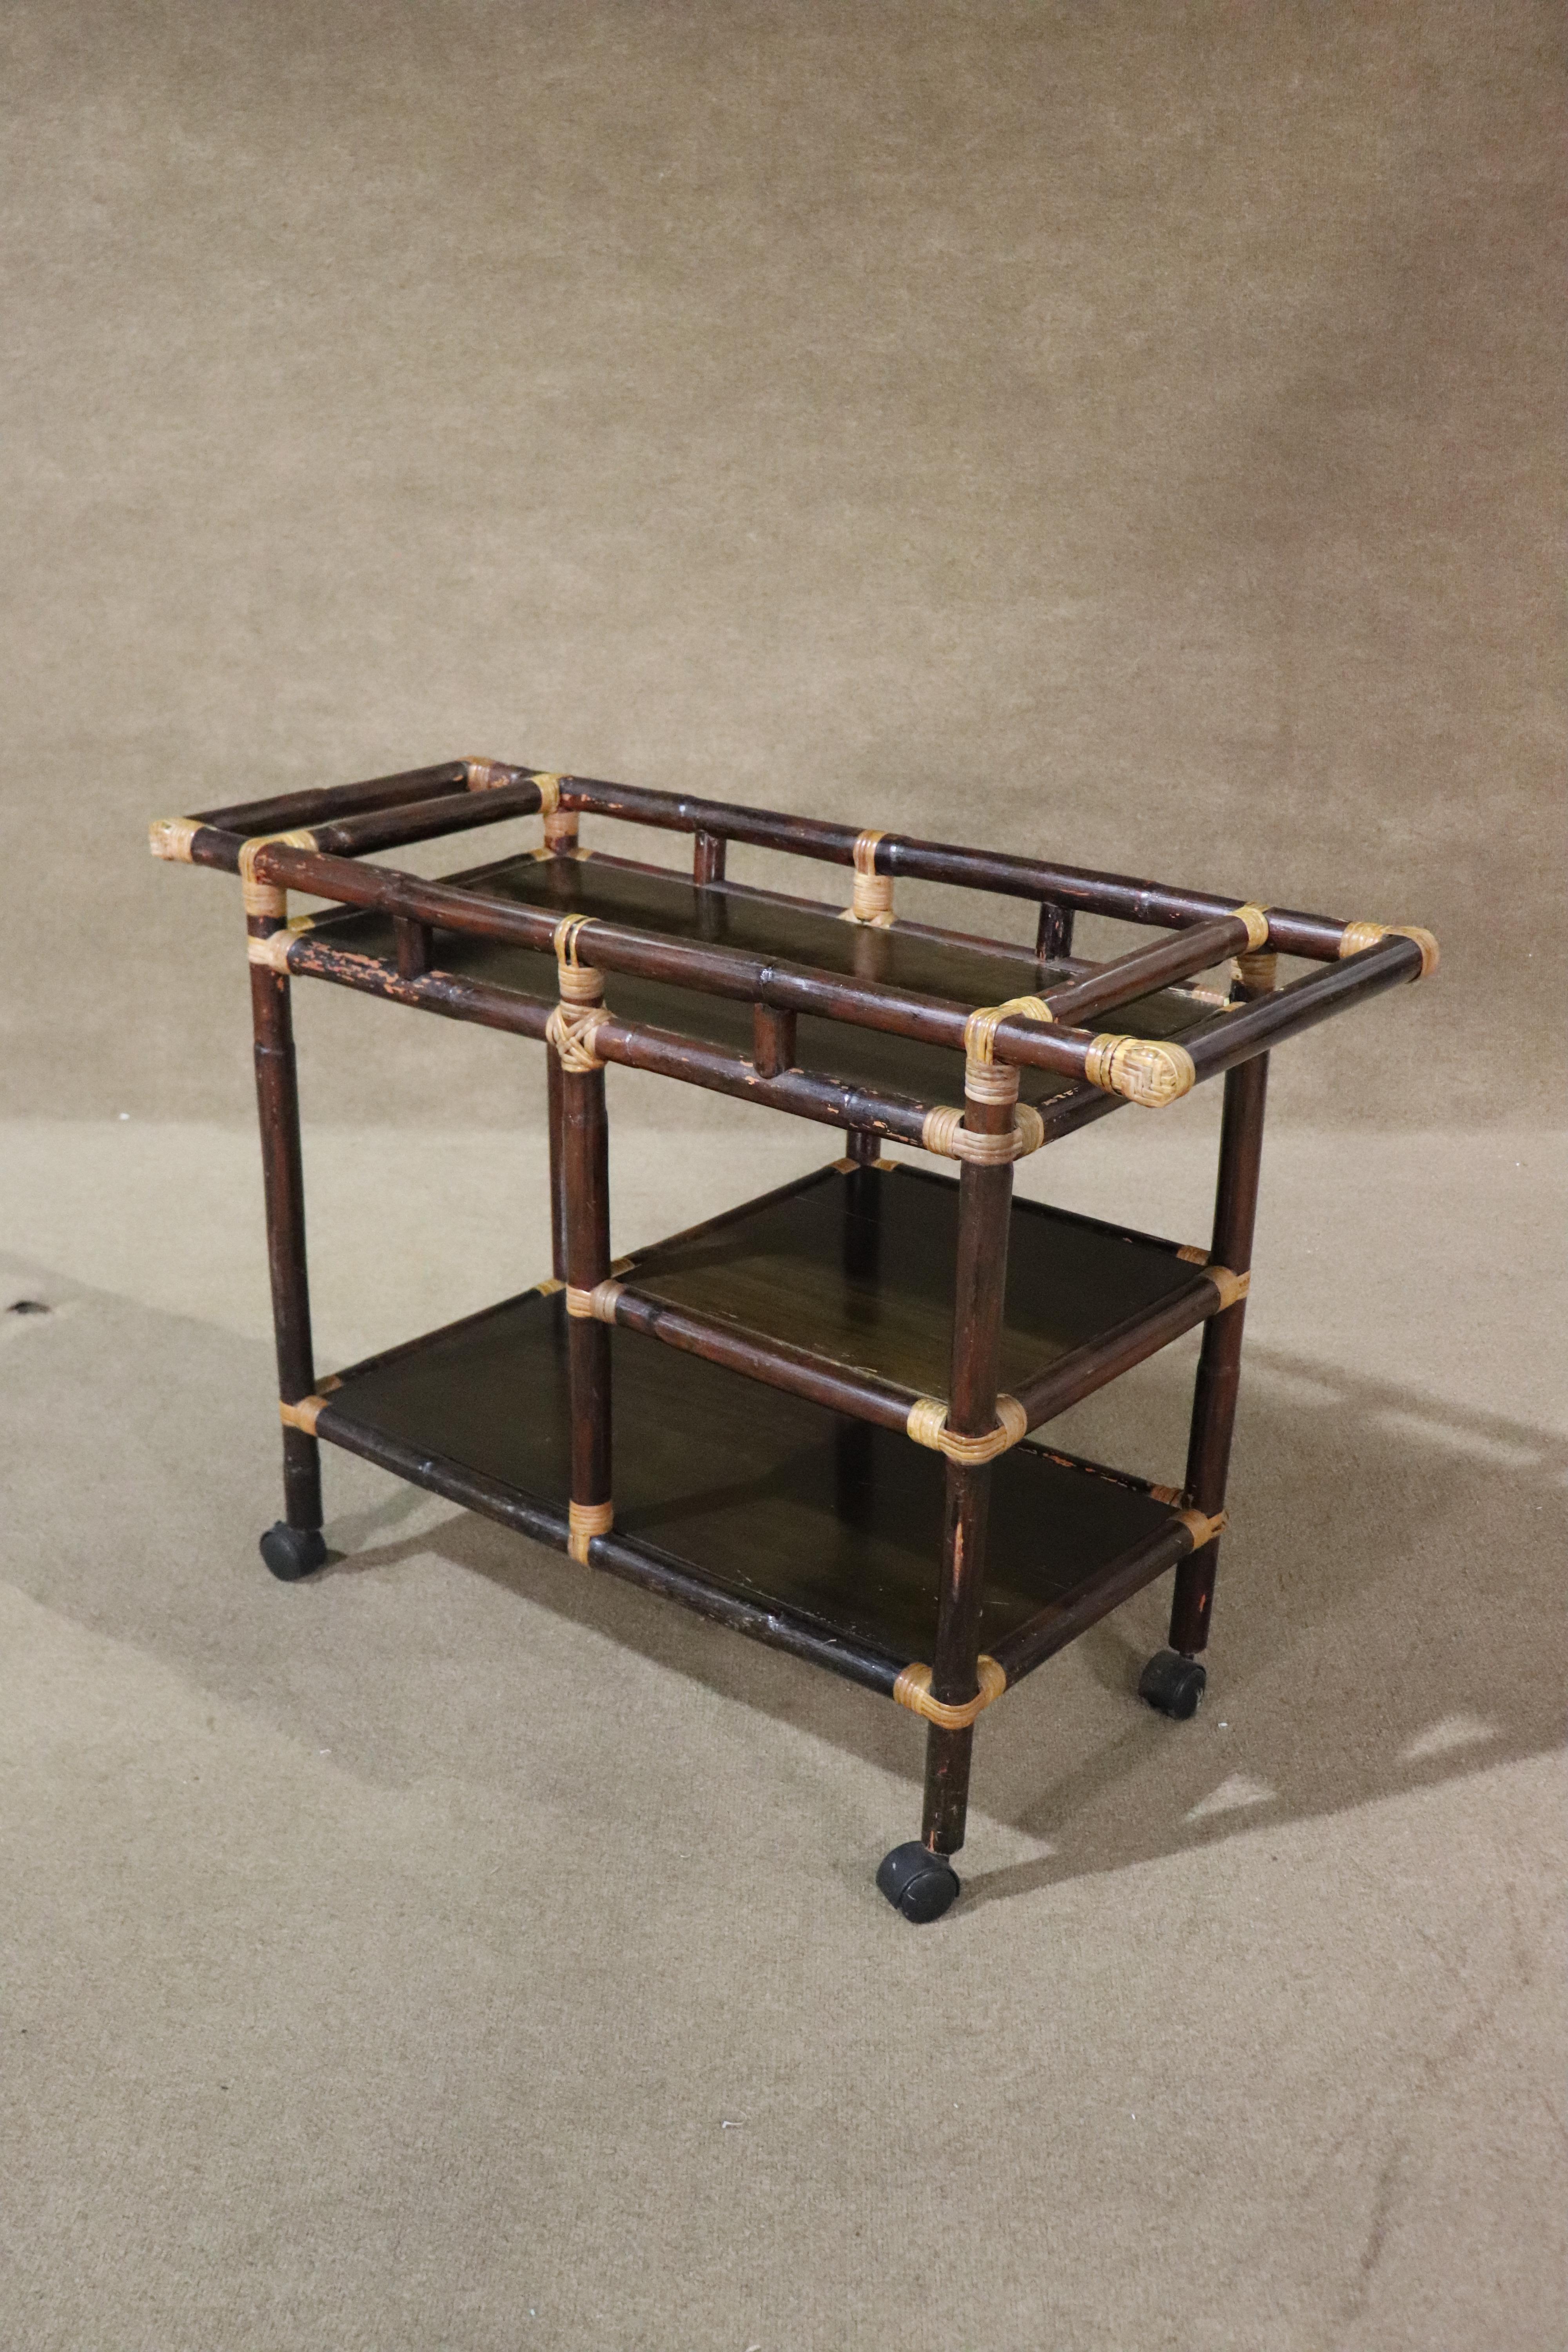 This rustic style rolling cart is ready for entertaining! Dark bamboo frame with accenting rattan finishes. Three shelves for your beverages and accessories.
Please confirm location NY or NJ